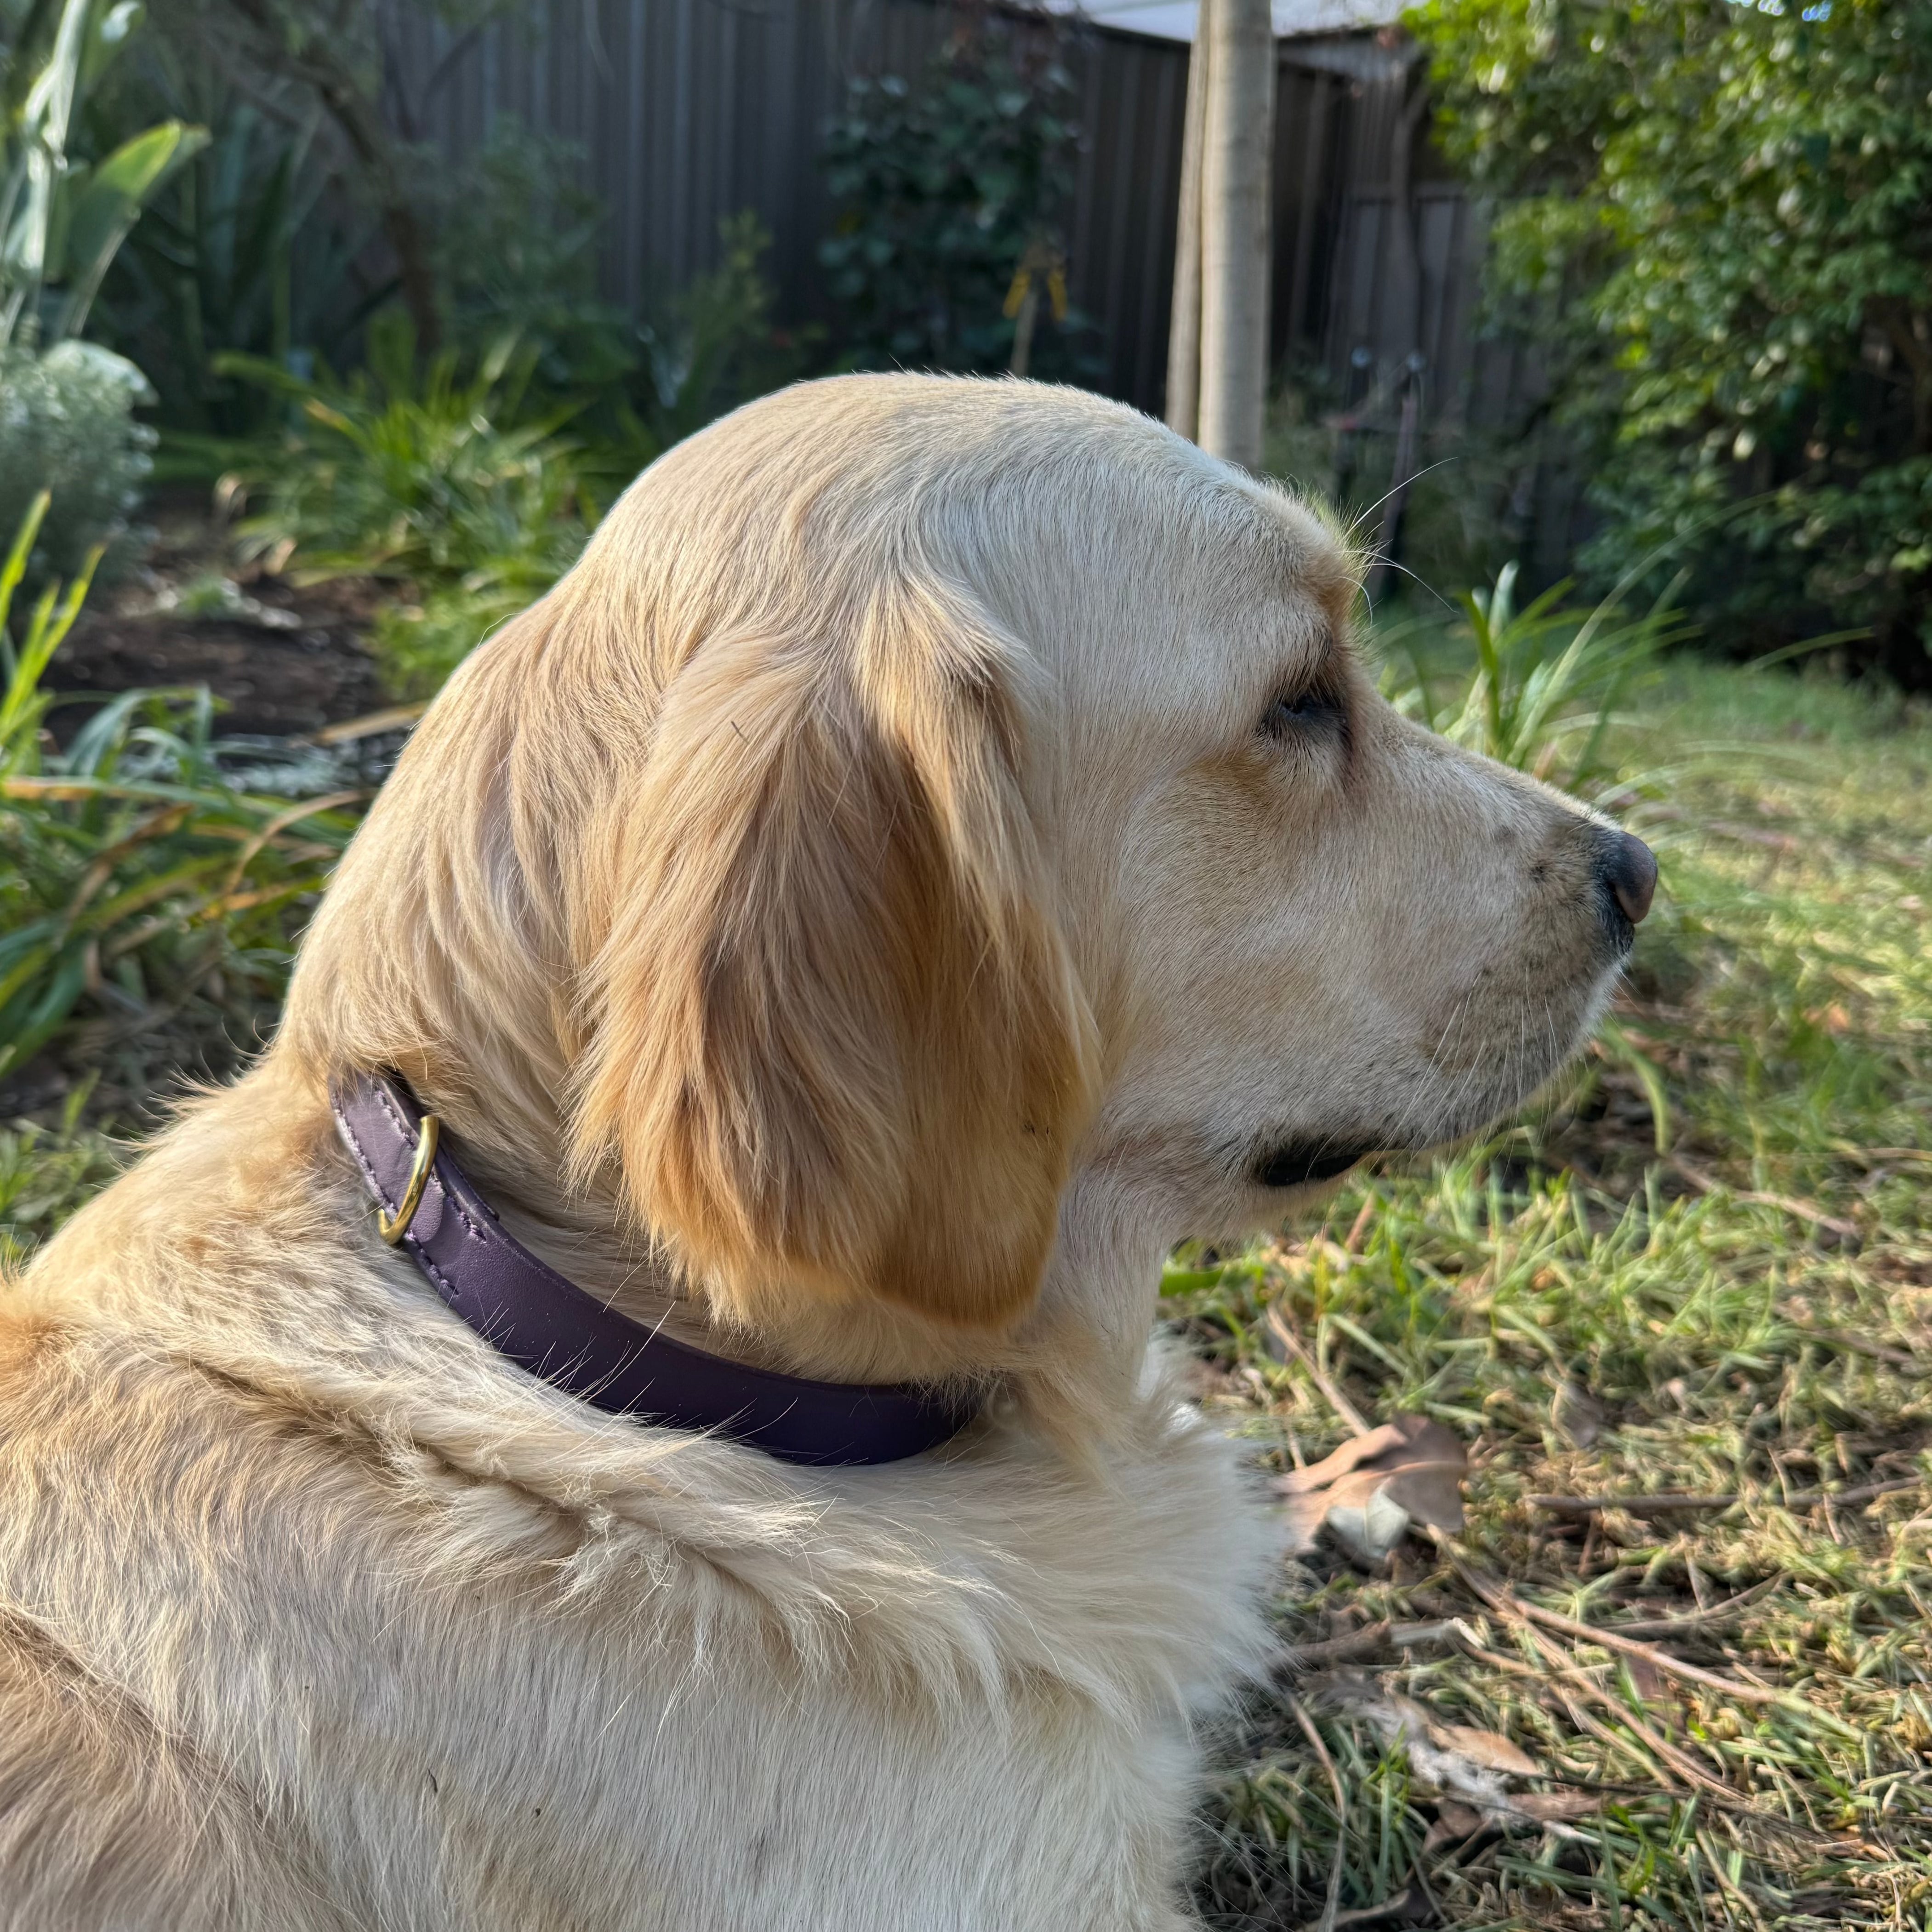 A golden retriever with a Georgie Paws Bald Collar Purple, featuring antique brass hardware, rests on the grass in a backyard. The dog is lying on its side, facing right, with its gaze fixed on something off-camera. The background includes plants, a tree, and a wooden fence on a sunny day.